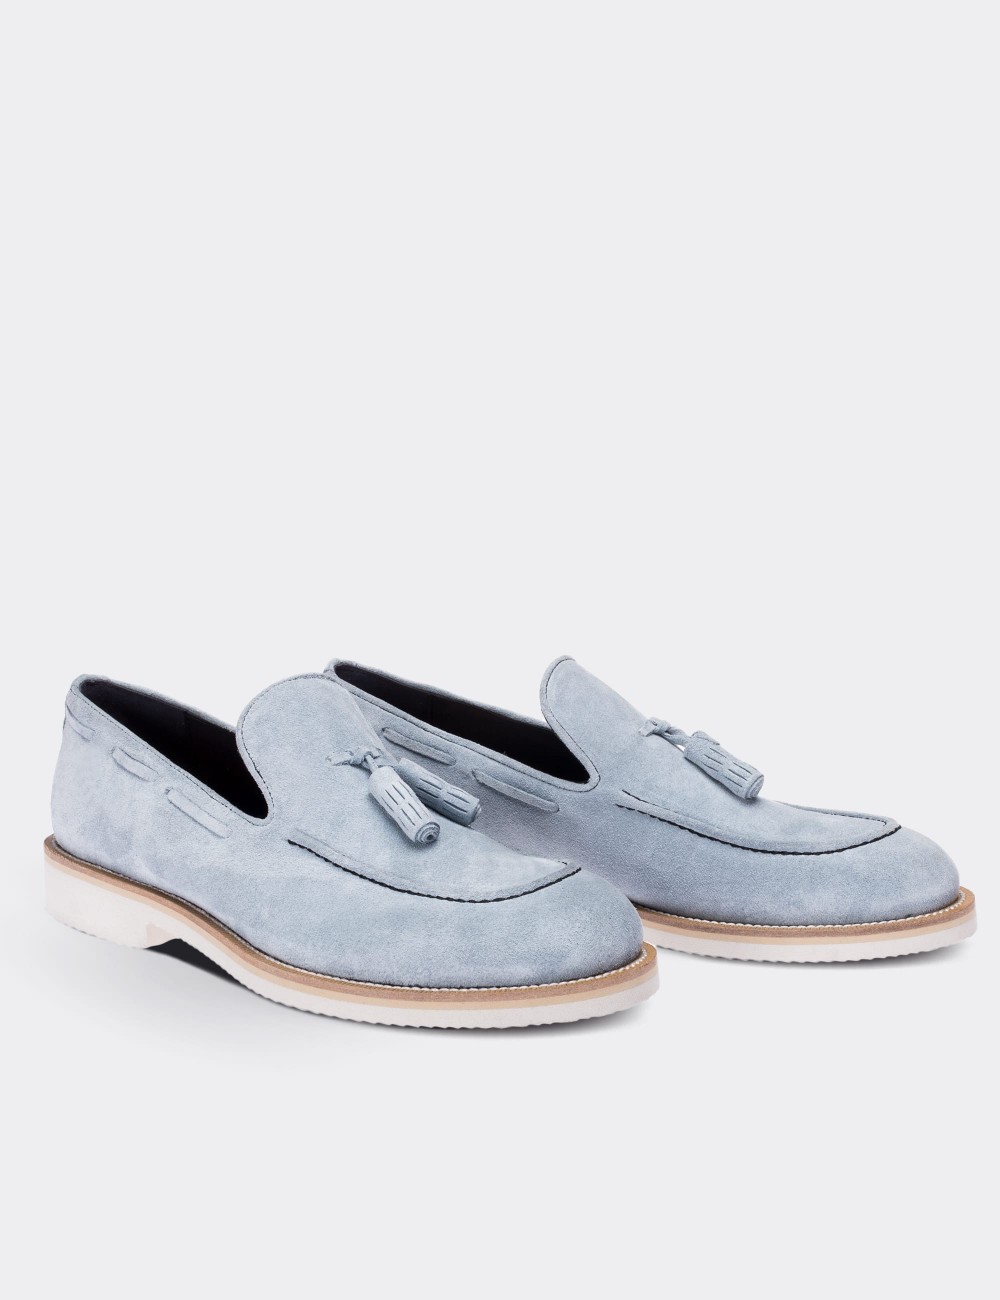 Blue Suede Leather Loafers - 01319MMVIE02